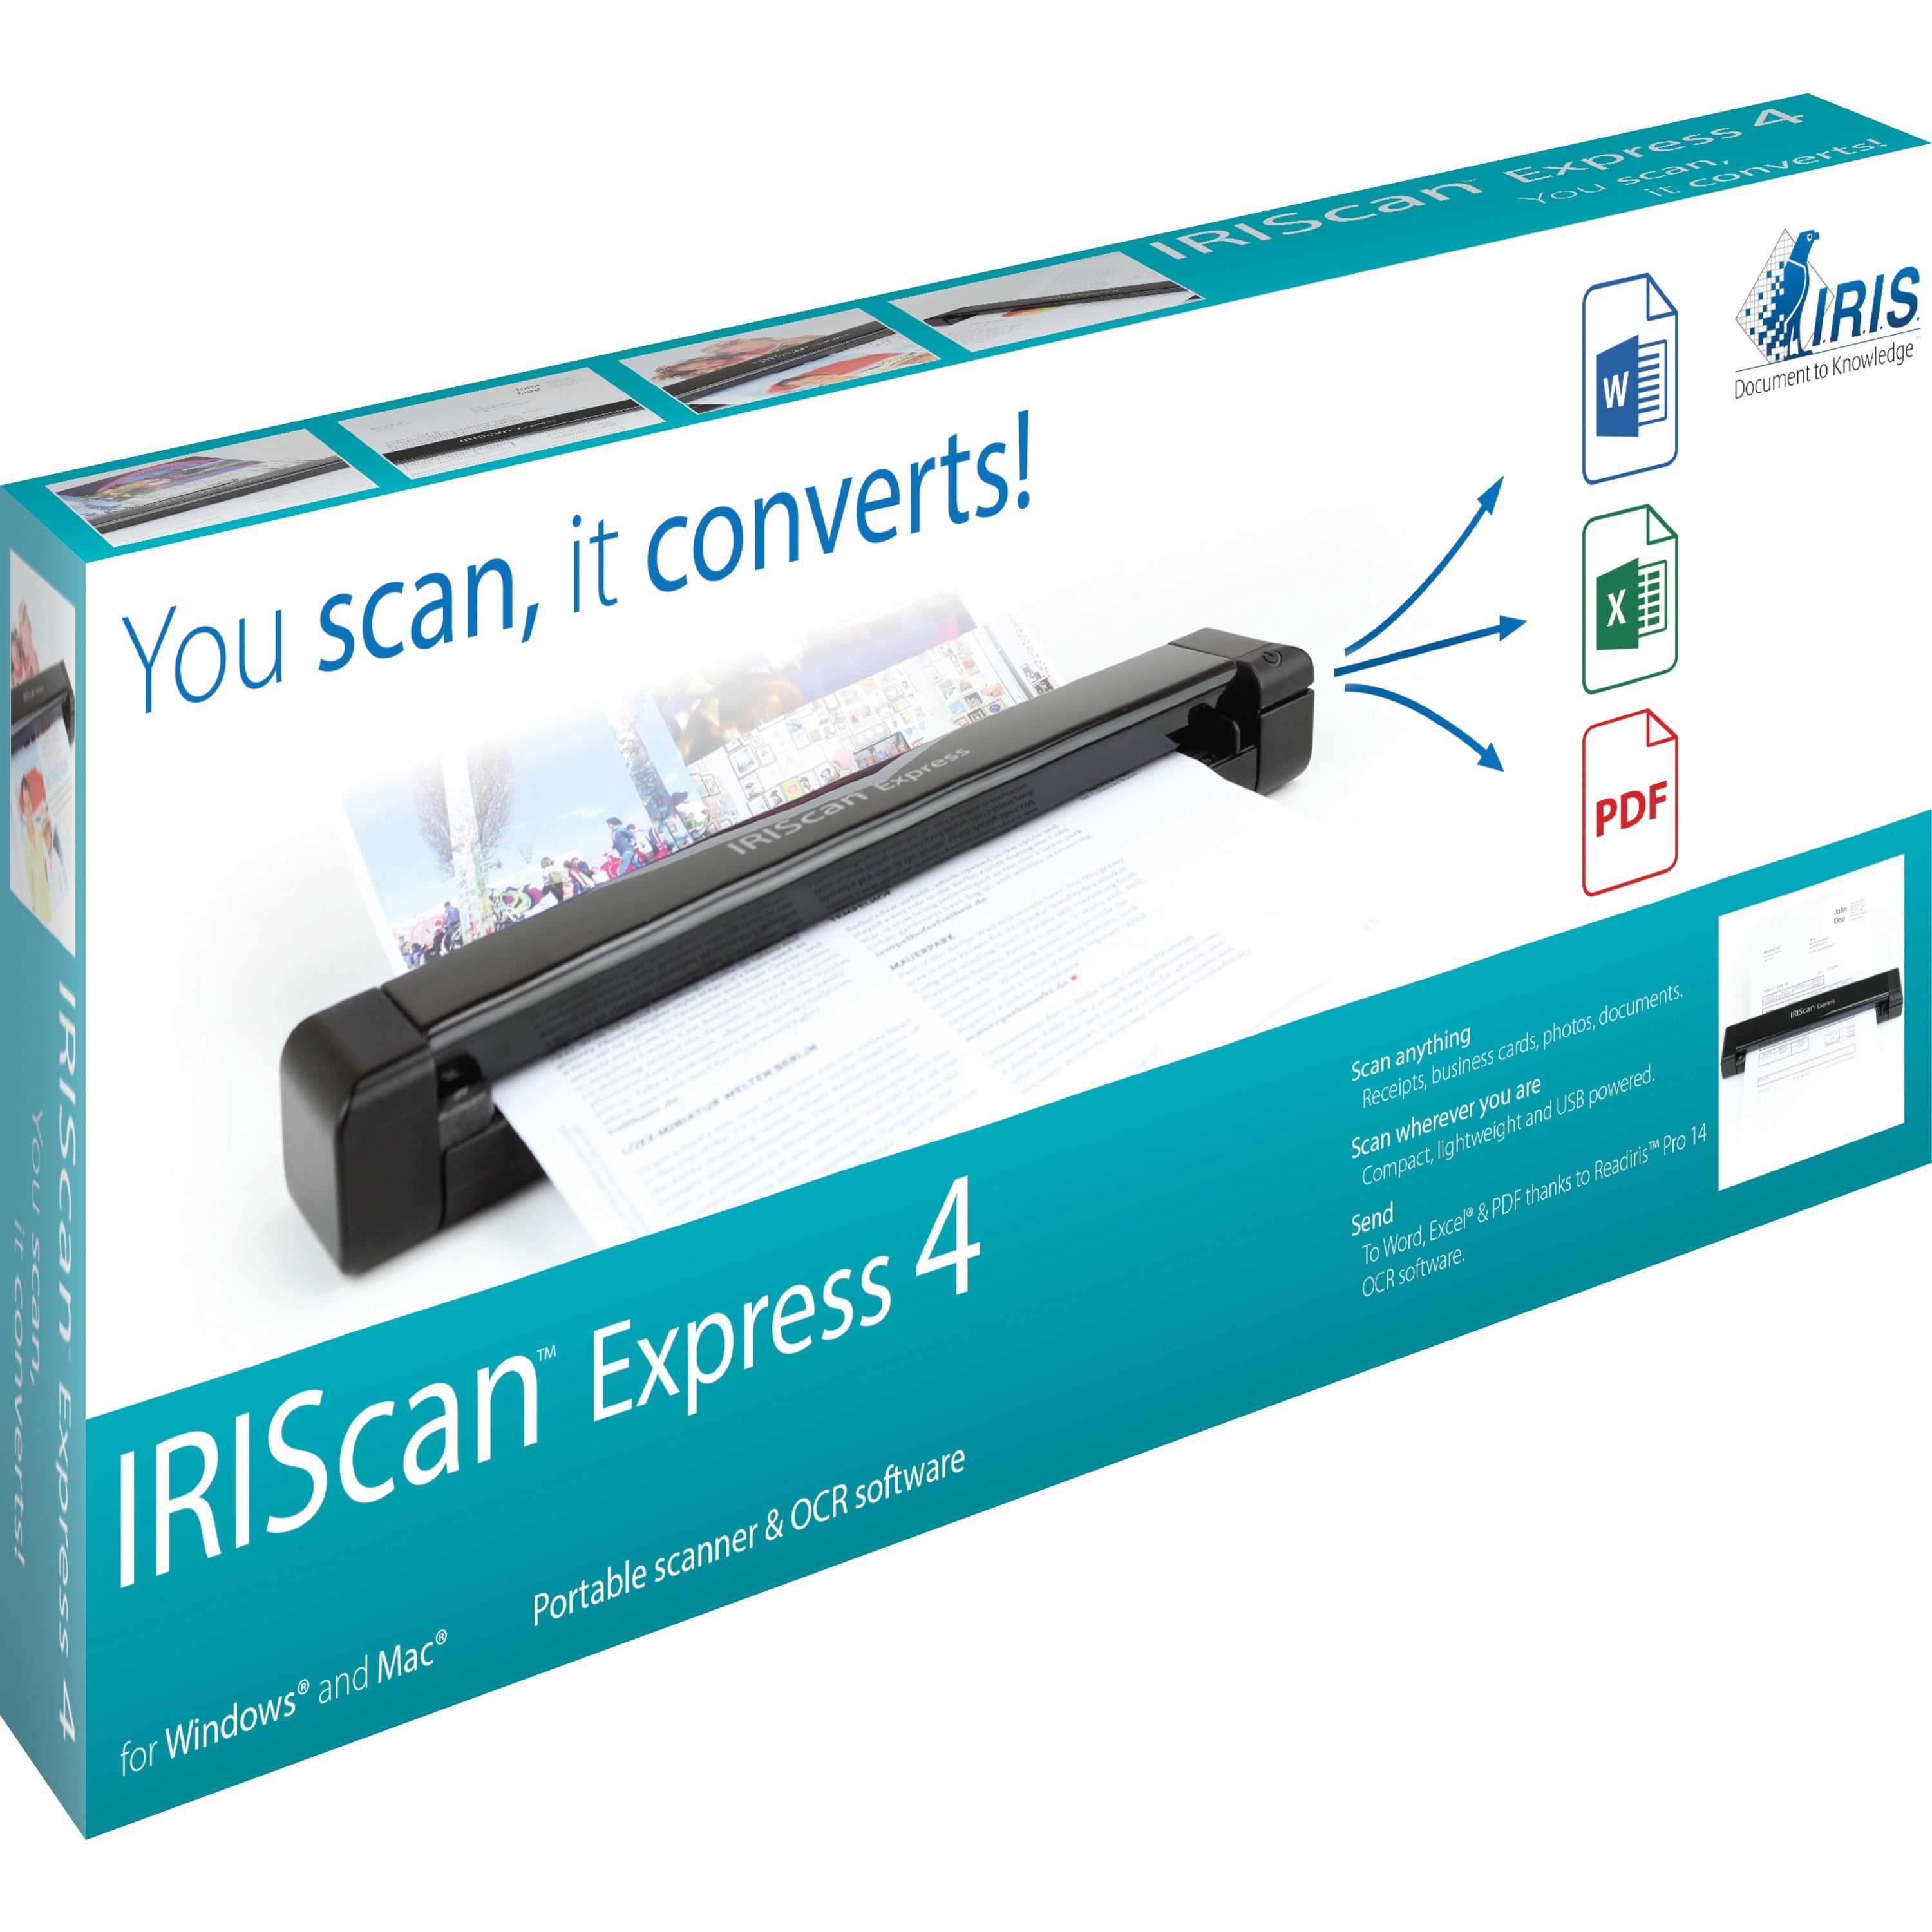 I.R.I.S Scan Anywhere 3 Wireless Portable 1200 dpi Color Scanner